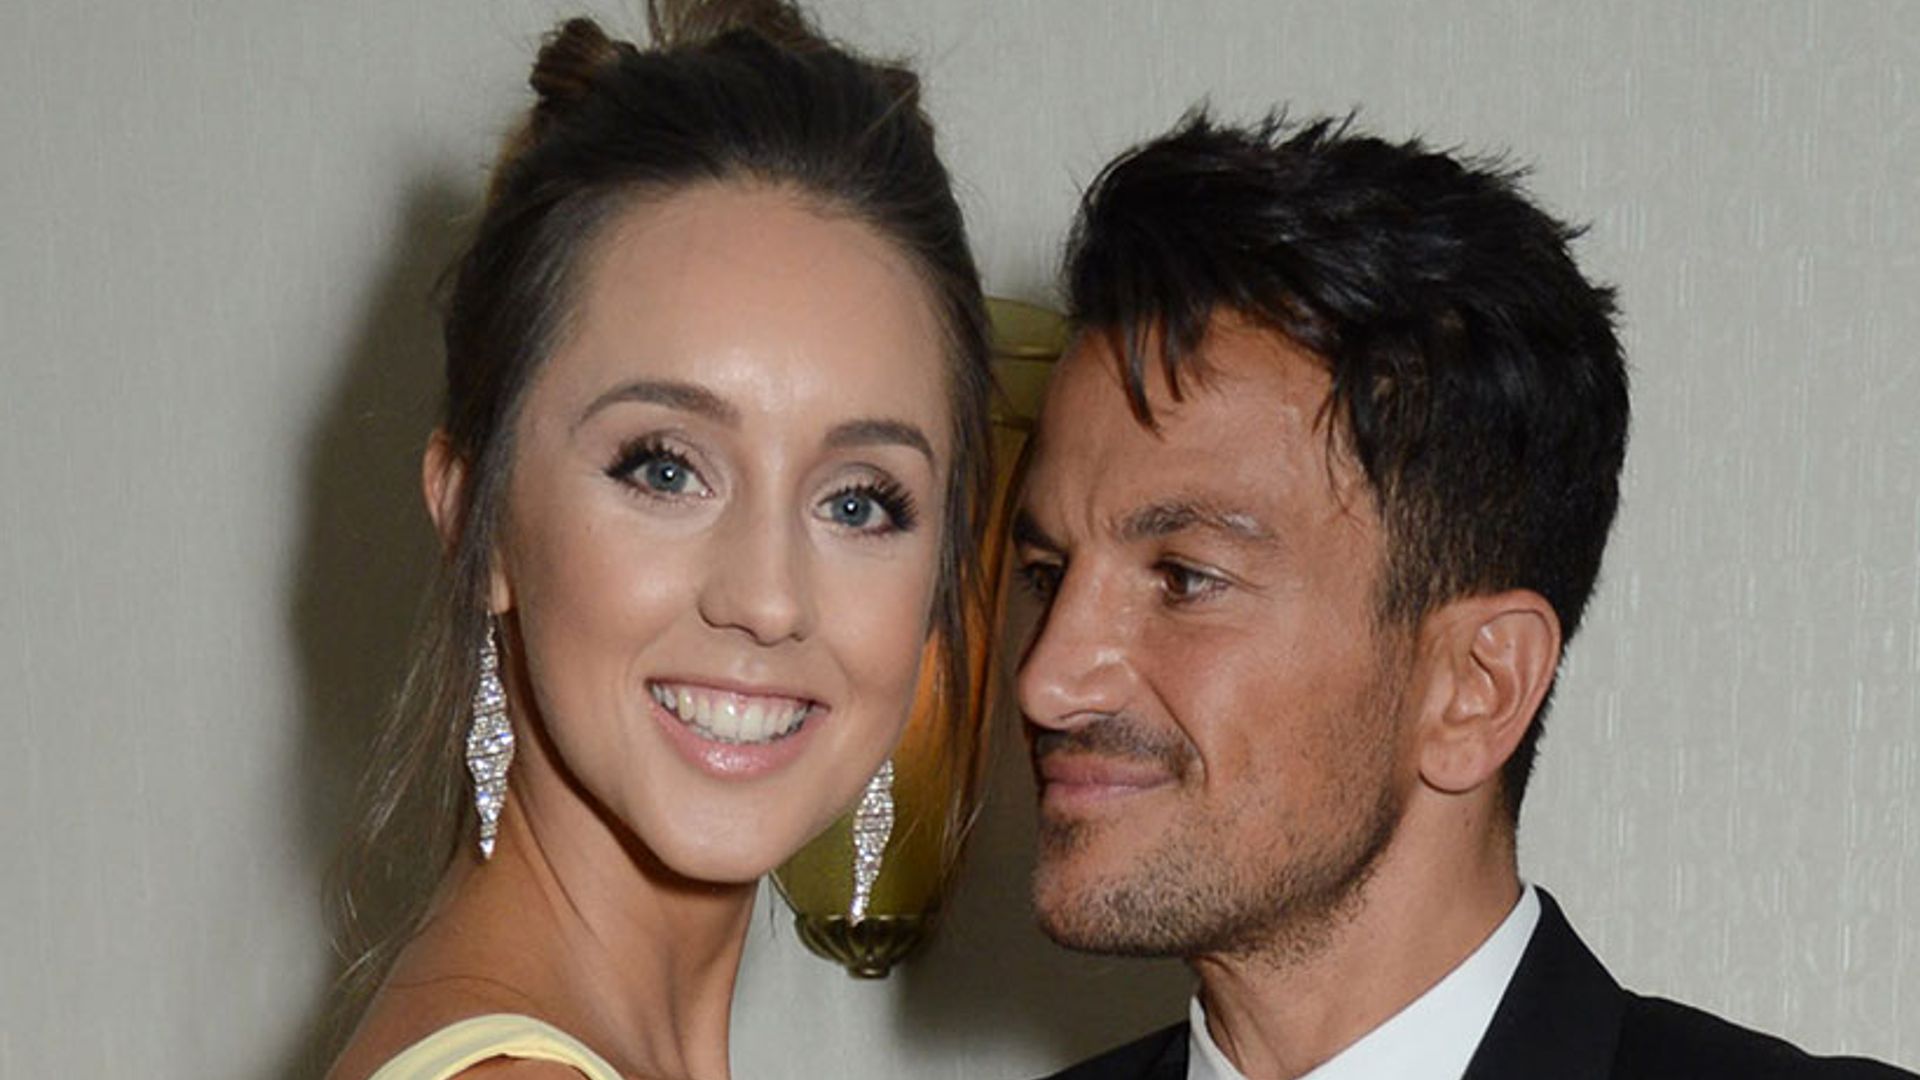 Peter Andre and wife Emily put on a loving display at the Butterfly Ball